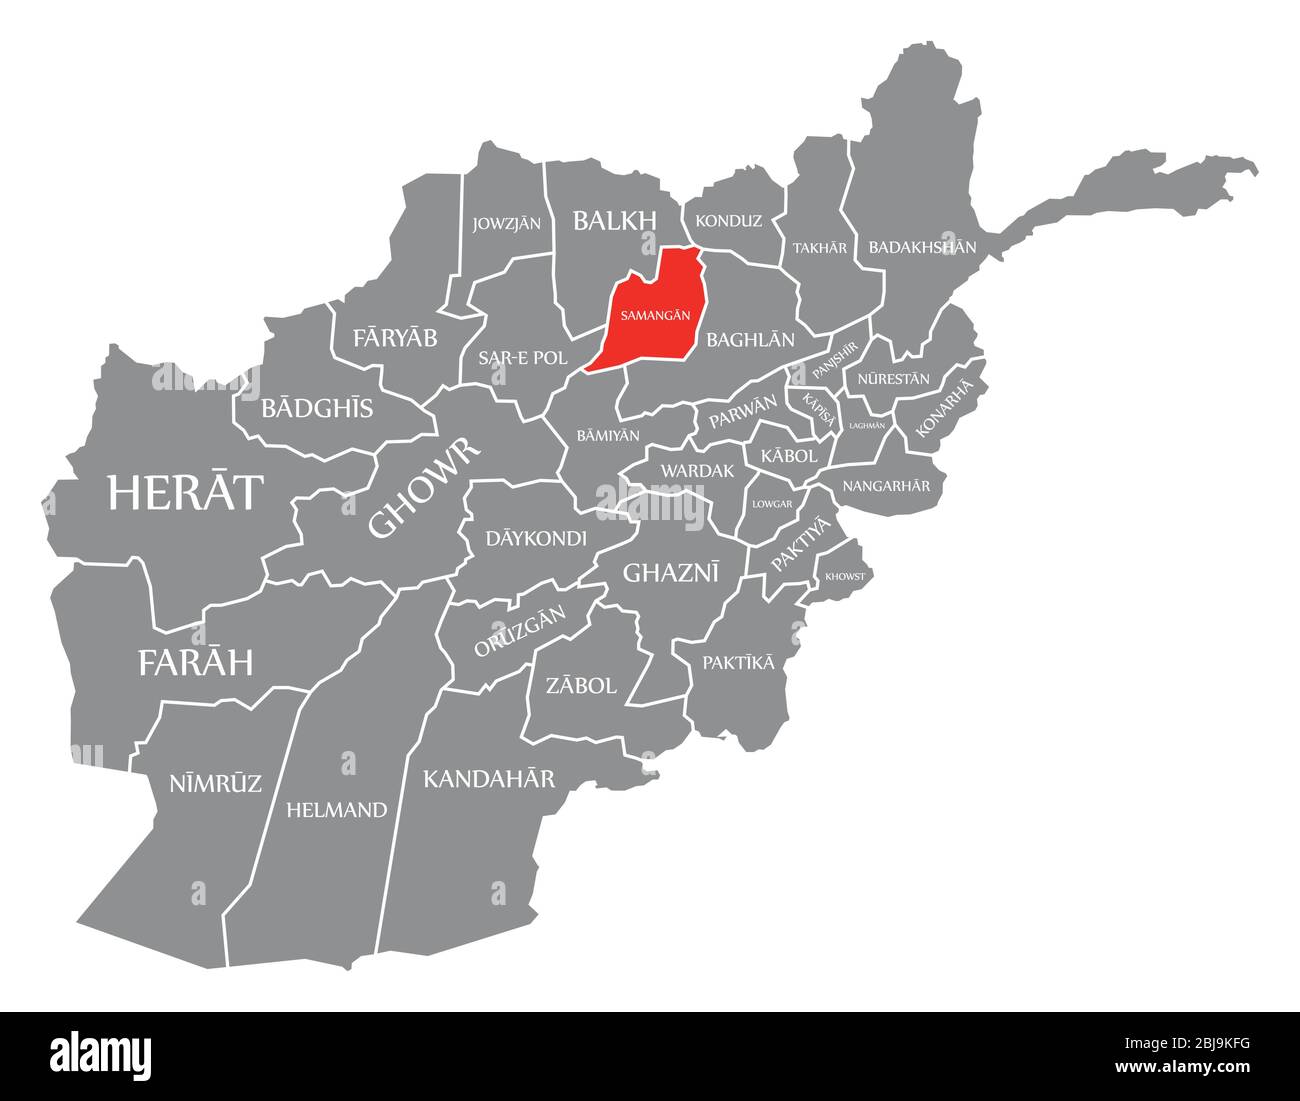 Samangan red highlighted in map of Afghanistan Stock Vector